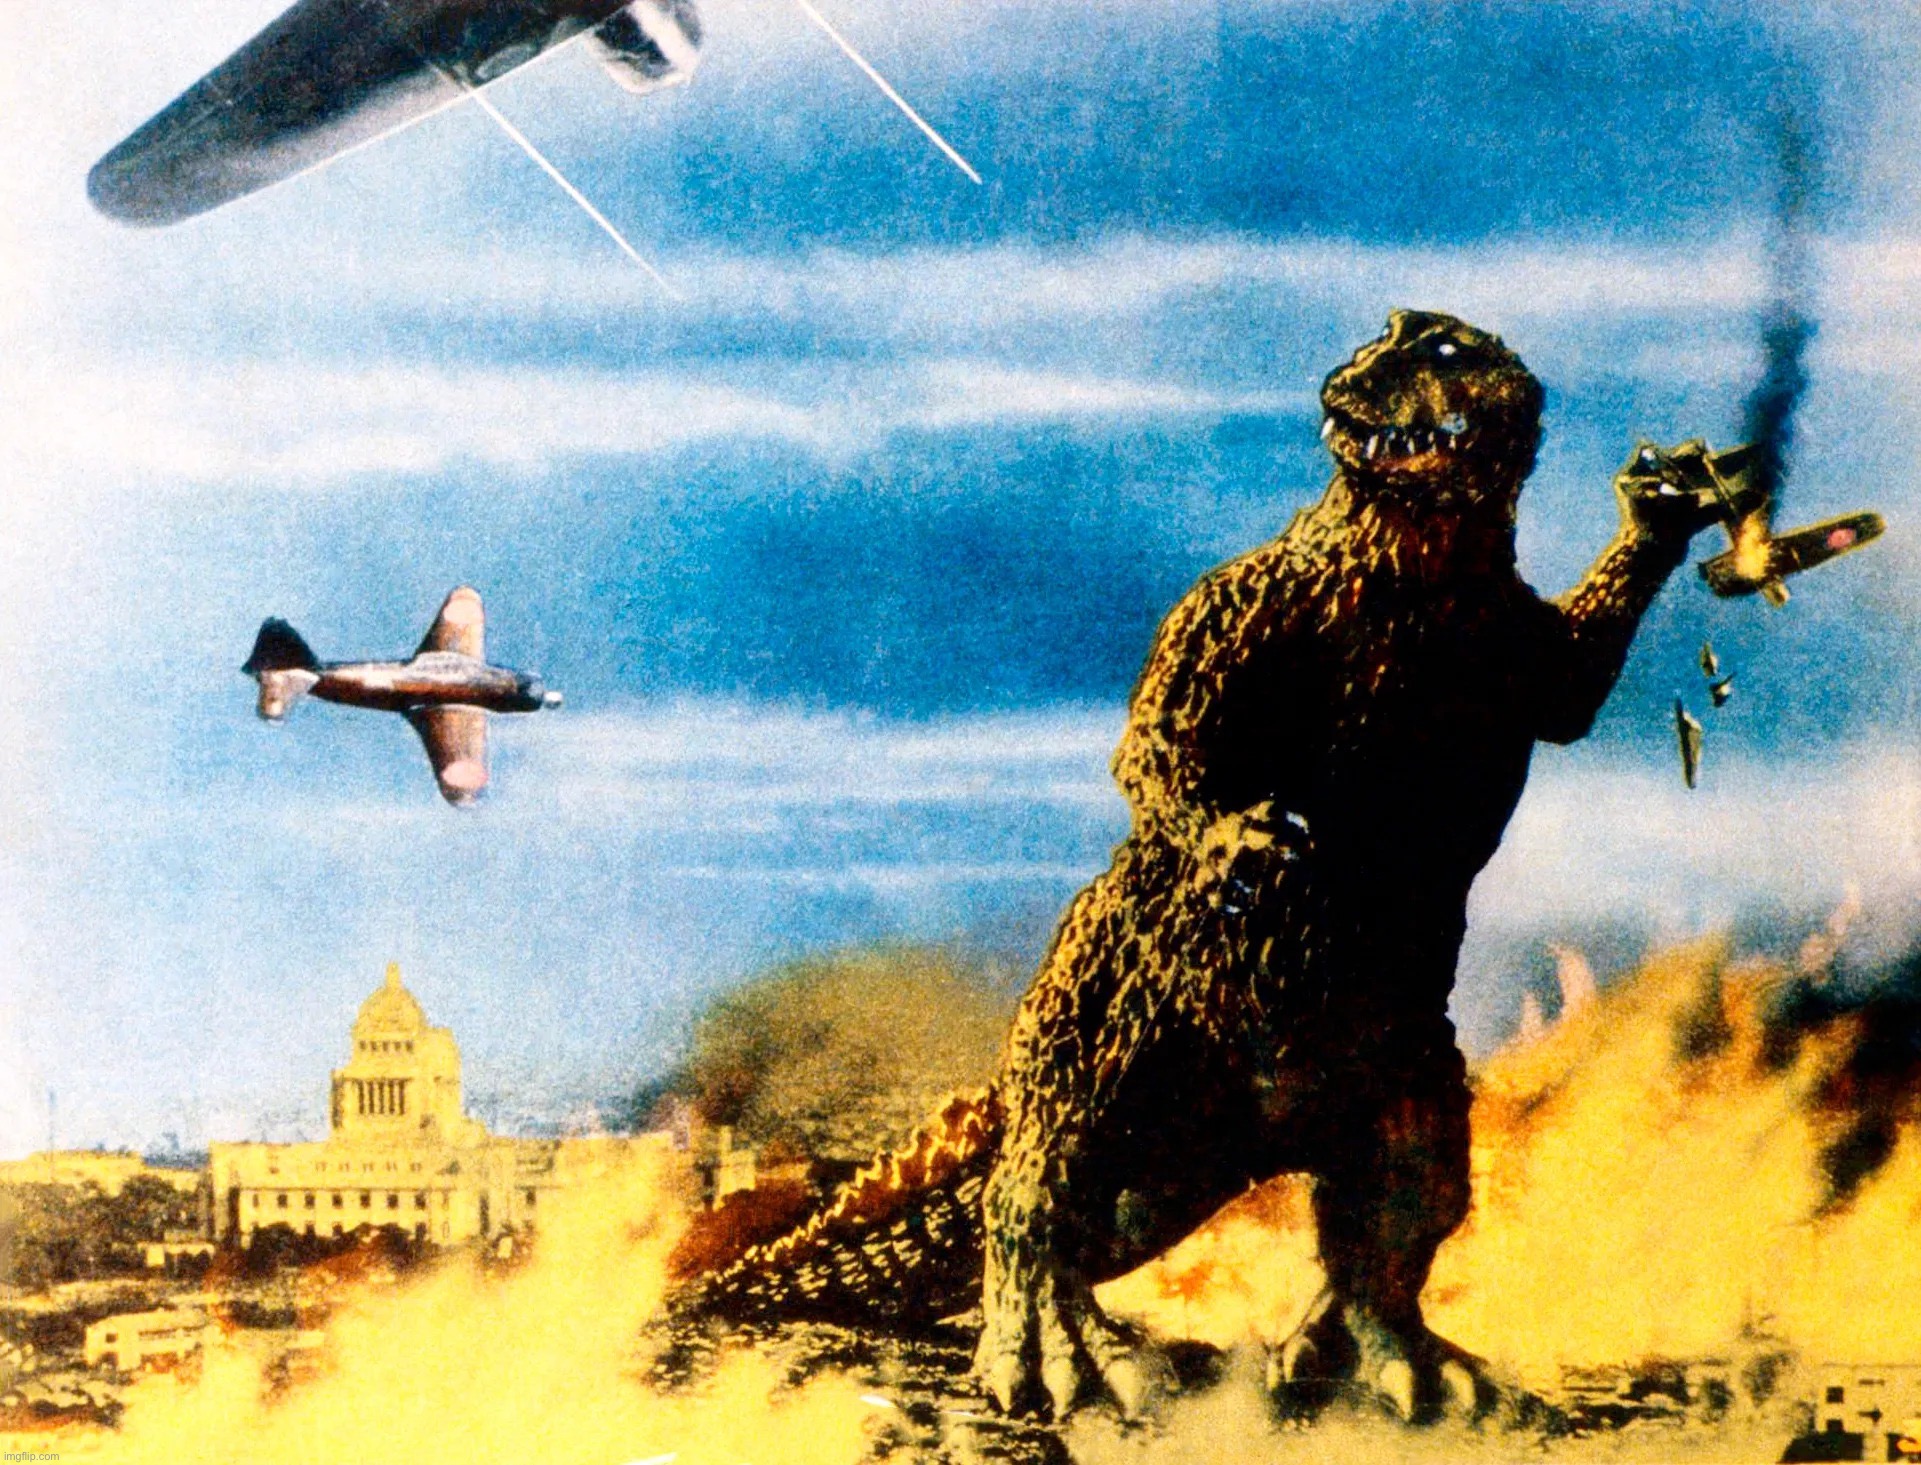 Godzilla snatches plane | image tagged in godzilla snatches plane,godzilla,kaiju,colossal kaiju combat,planes,airplane | made w/ Imgflip meme maker